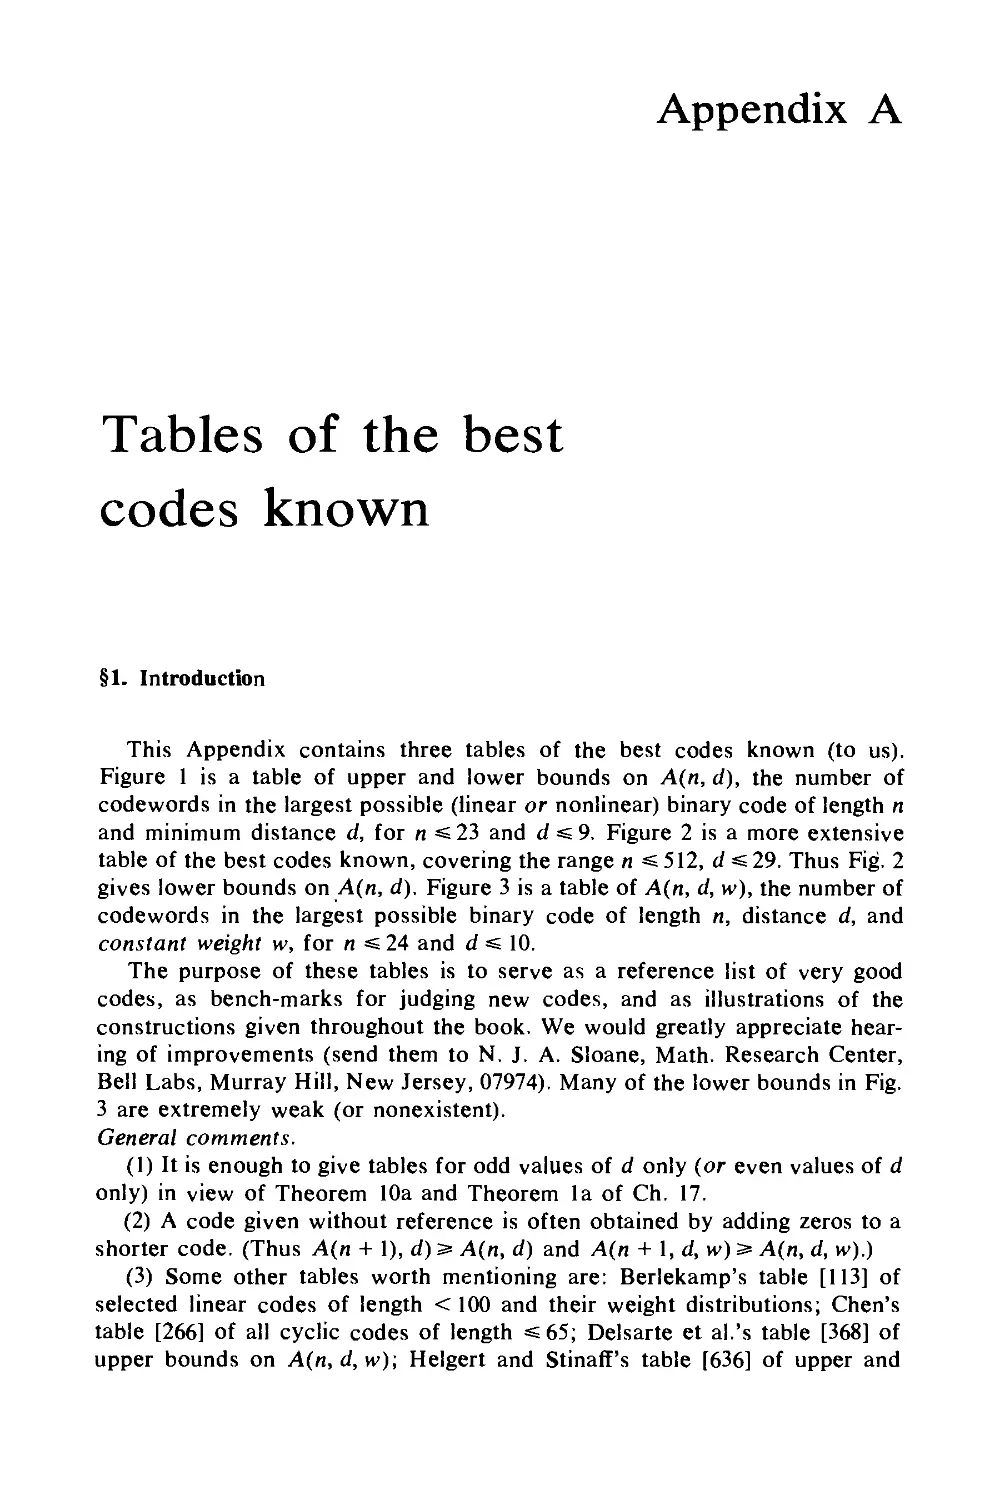 Appendix A - Tables of the bestcodes known